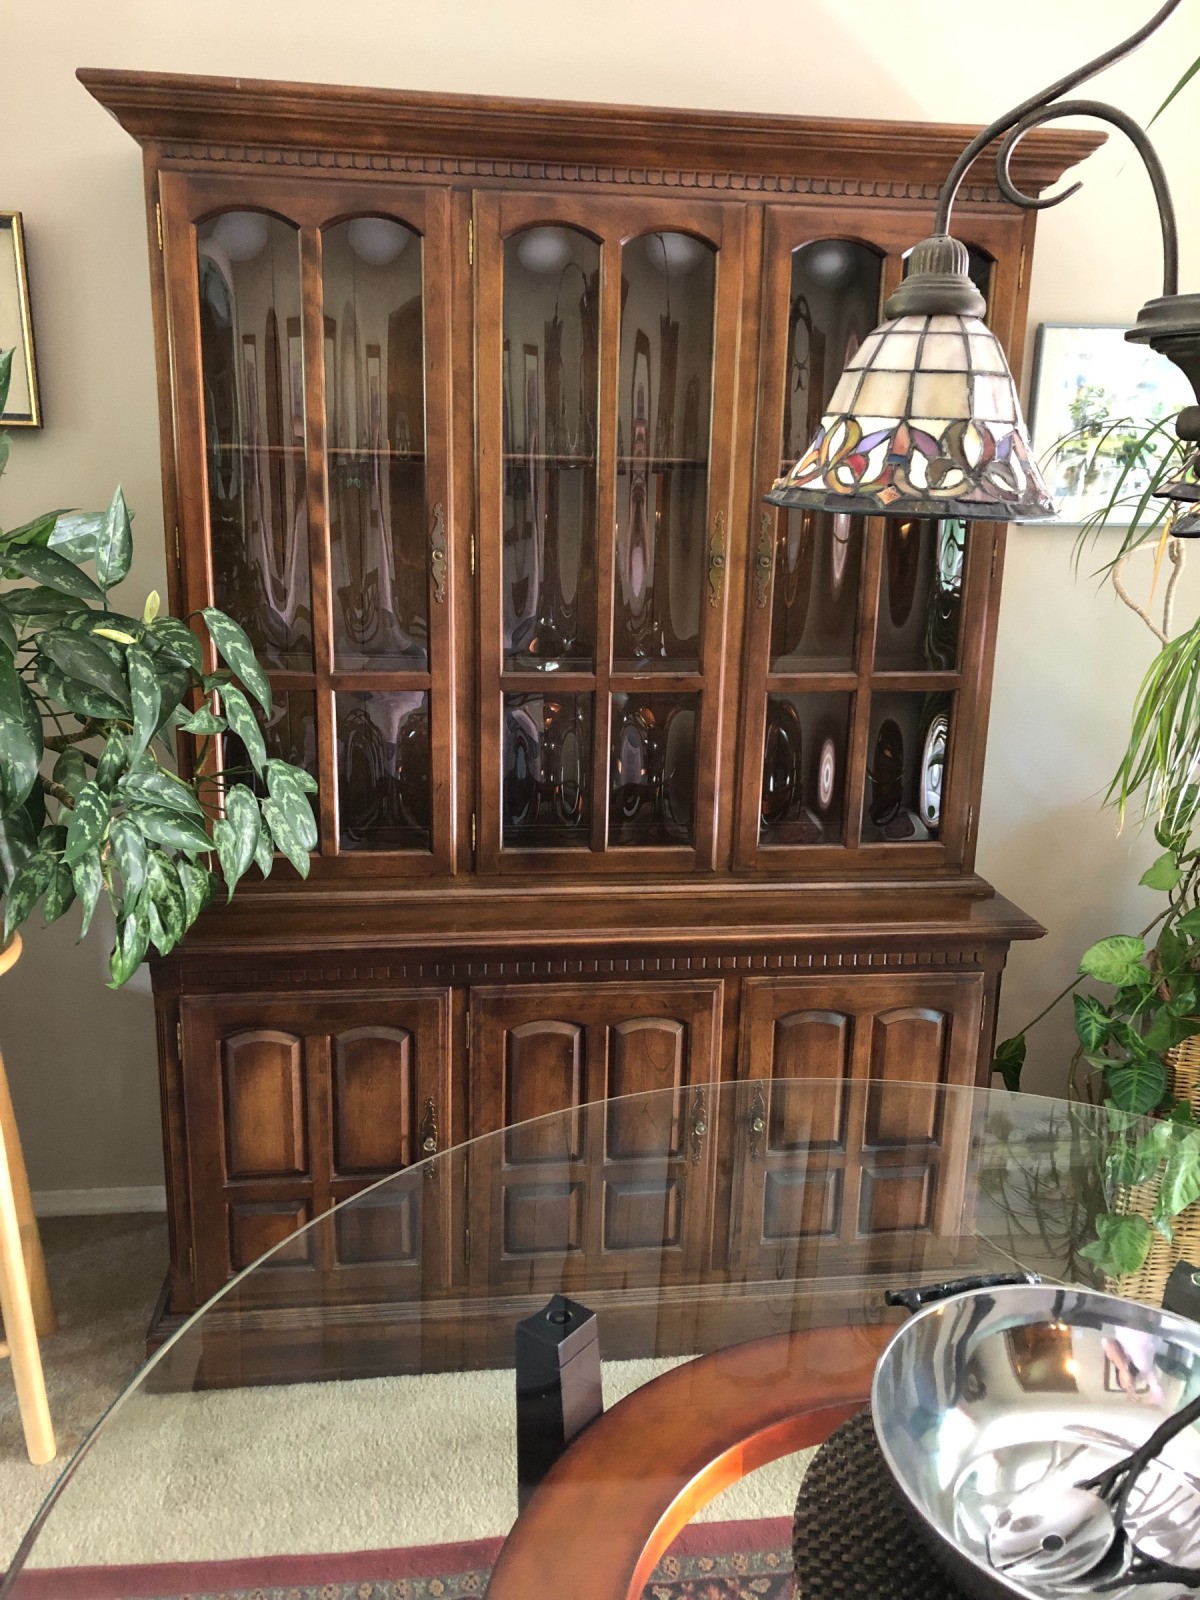 Value Of A Vintage Ethan Allen Hutch, Ethan Allen Dining Room Hutch